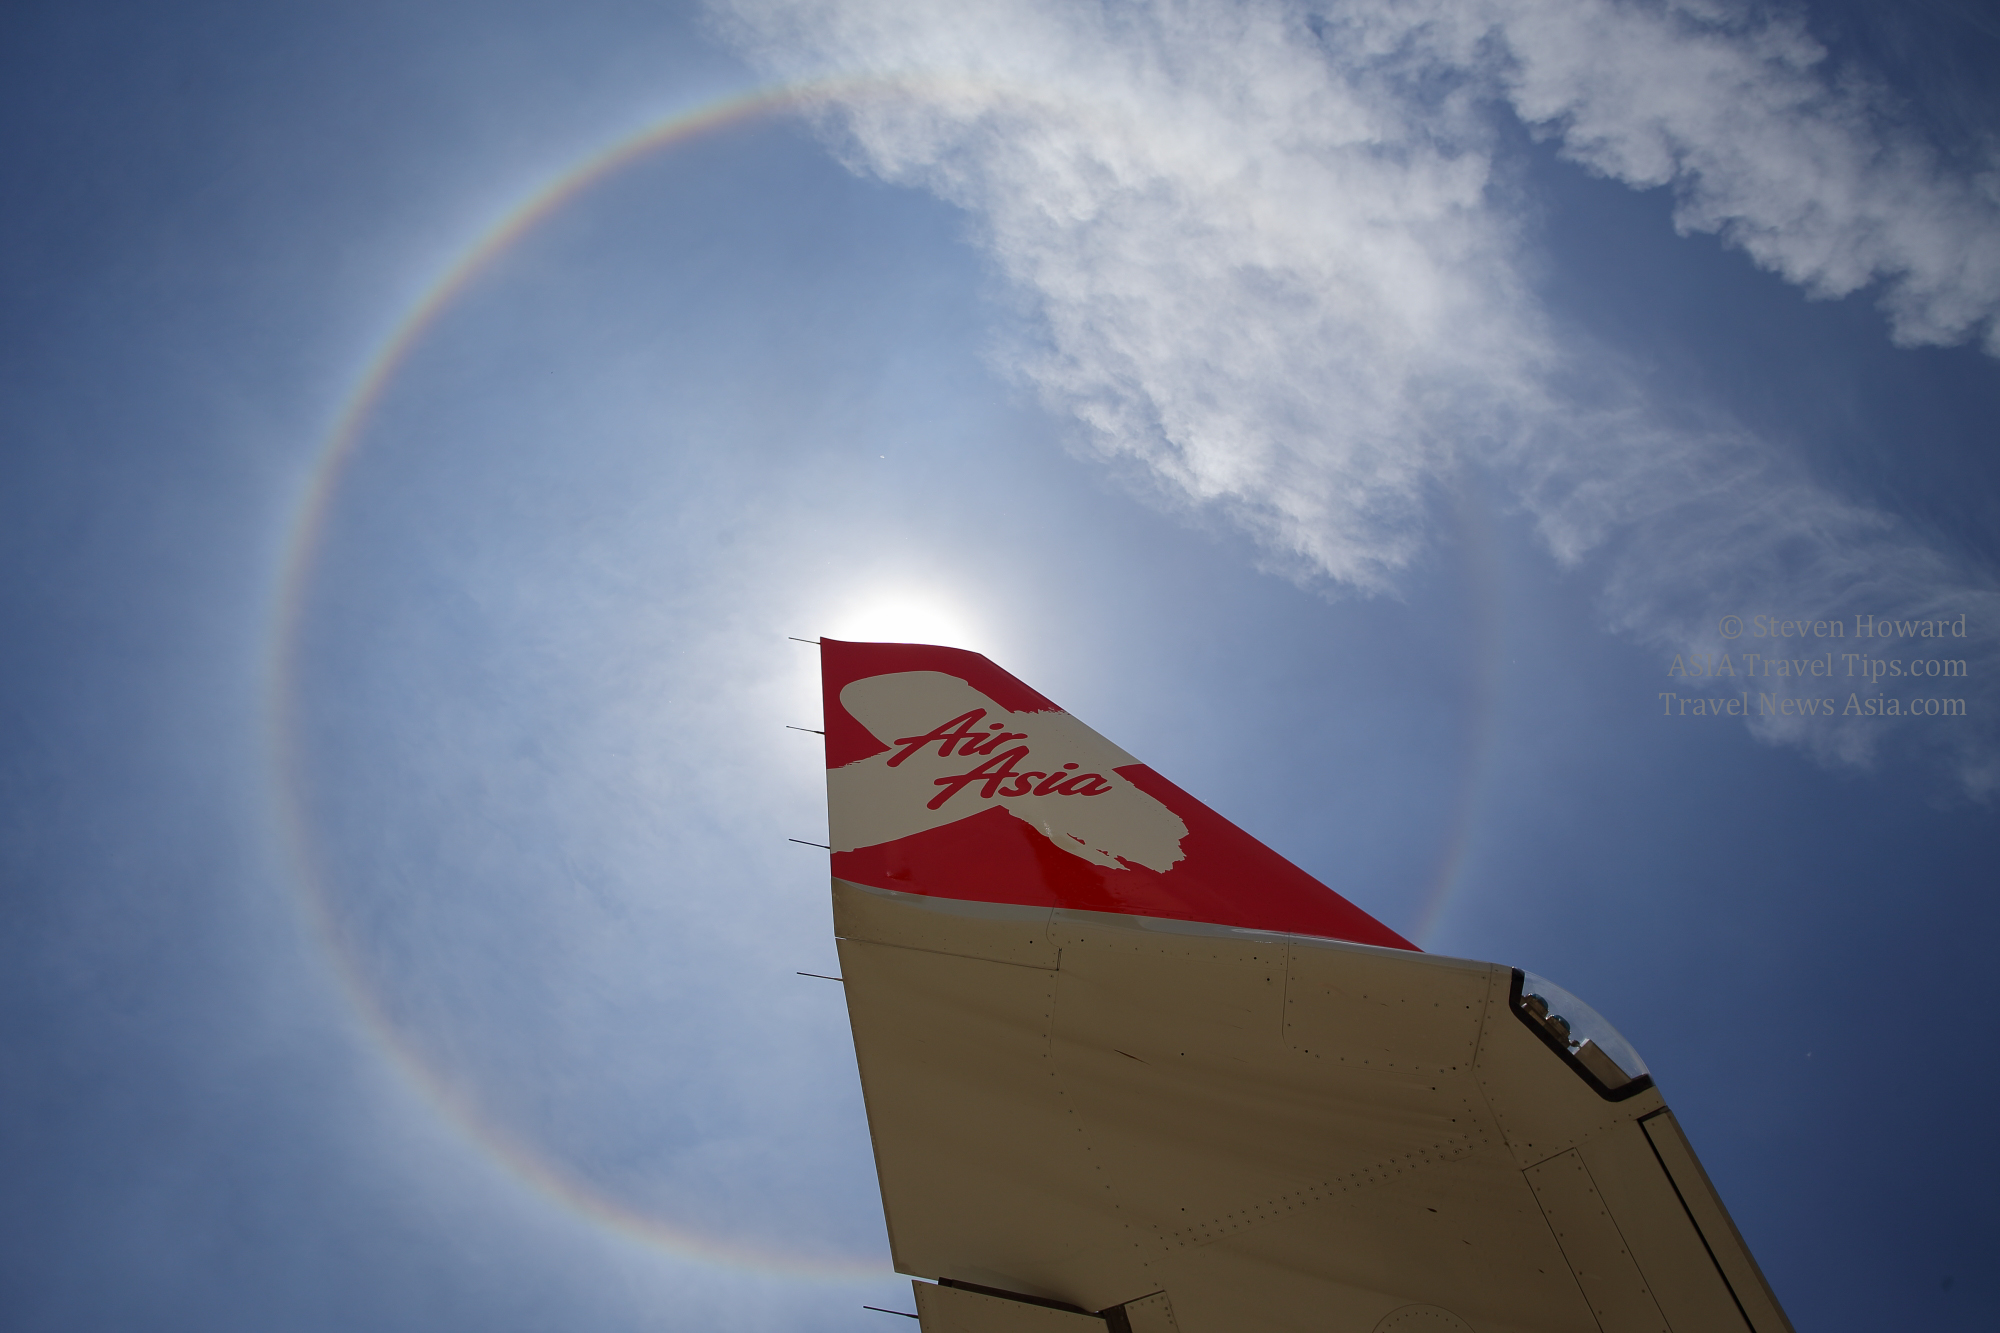 Sunbow in the very sunny sky over Don Mueang Airport in Bangkok on 14 May 2014 while filming Thai AirAsia X's Airbus A330-300 Aircraft - HD Video Tour. Click to enlarge.